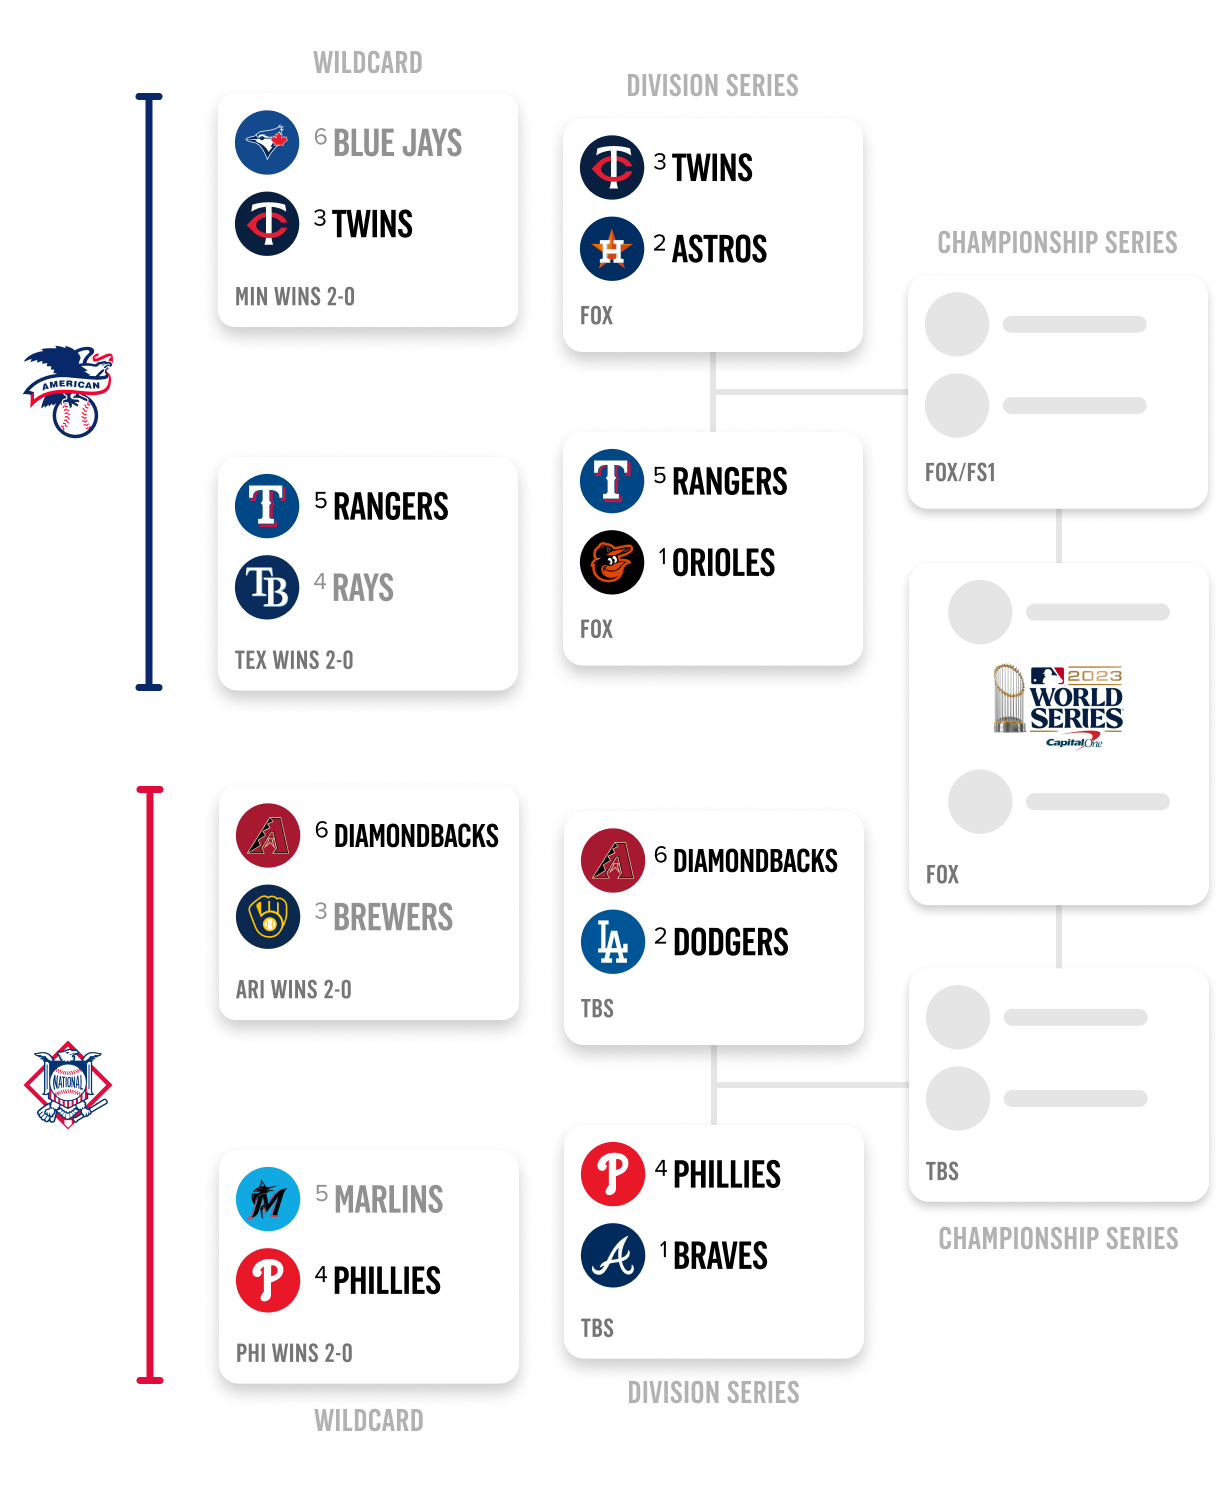 2023 NFL playoff bracket: Schedule for the divisional round and